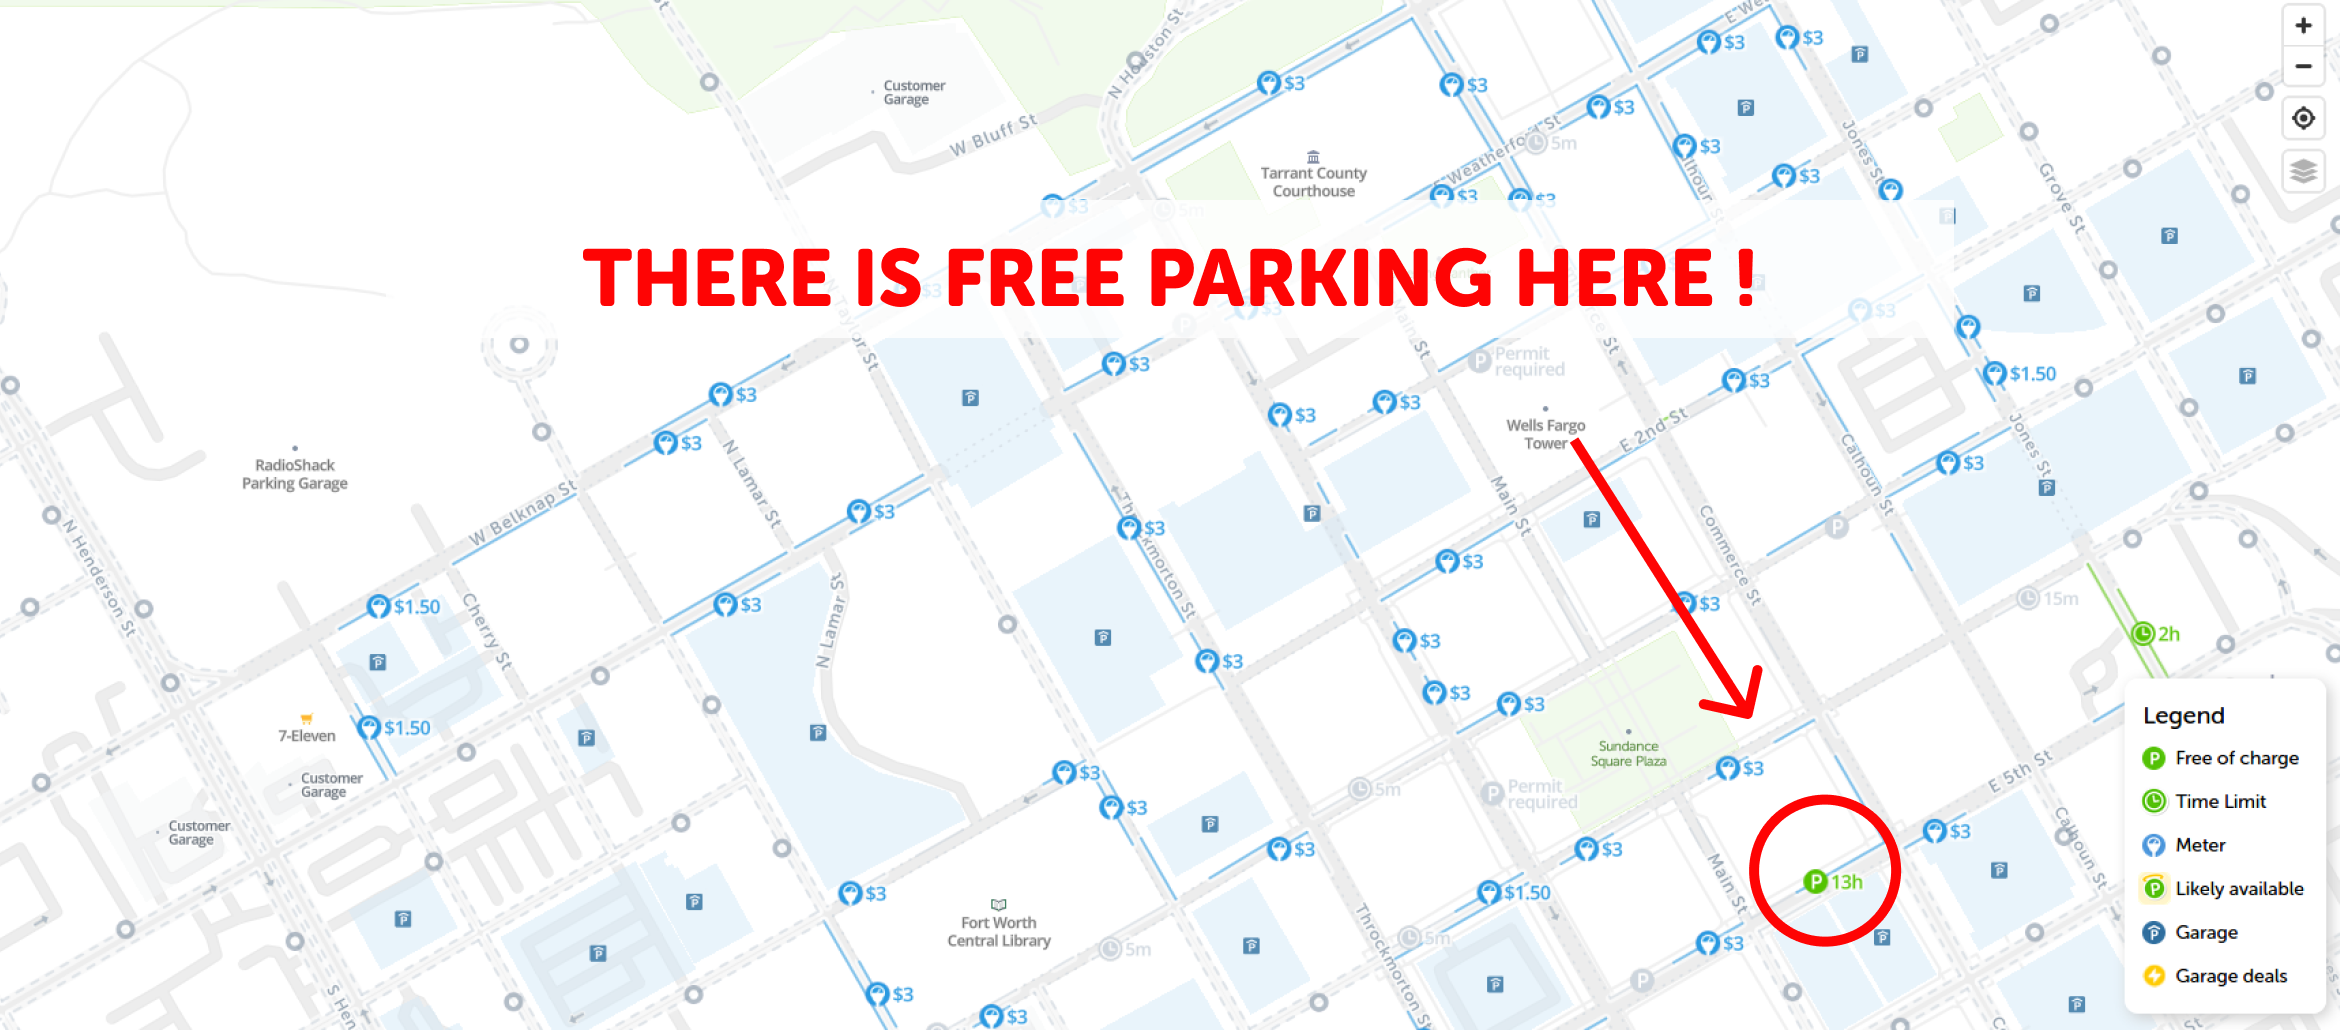 map of free parking in Fort Worth - SpotAngels